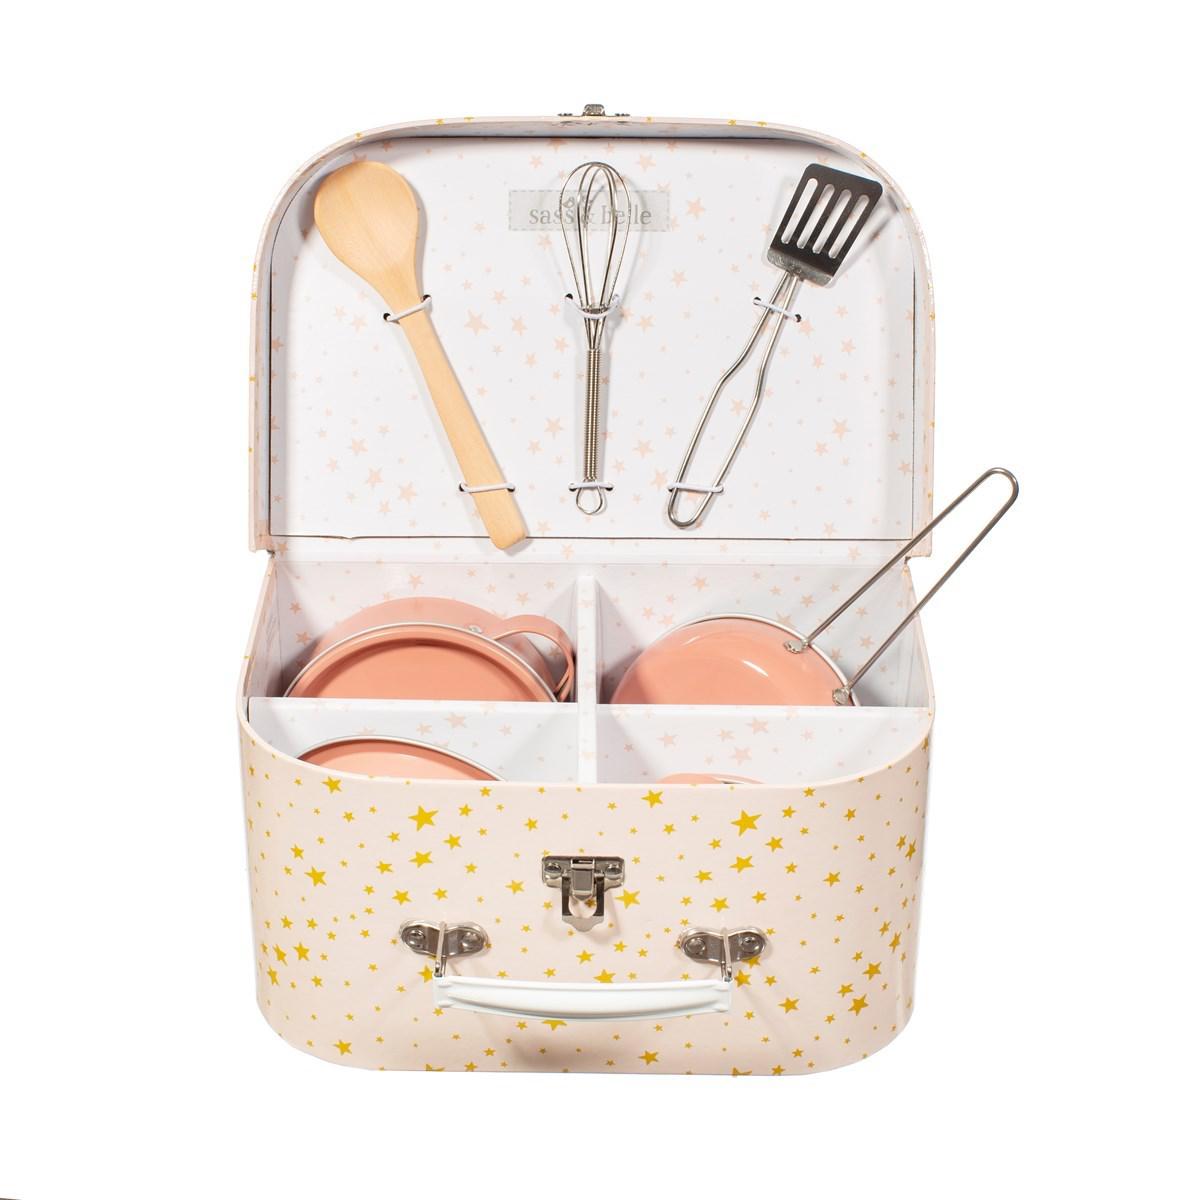 Scattered Stars Metal Toy Cooking Set  Little Dreamers Gift – Little  Dreamers Gift Shop